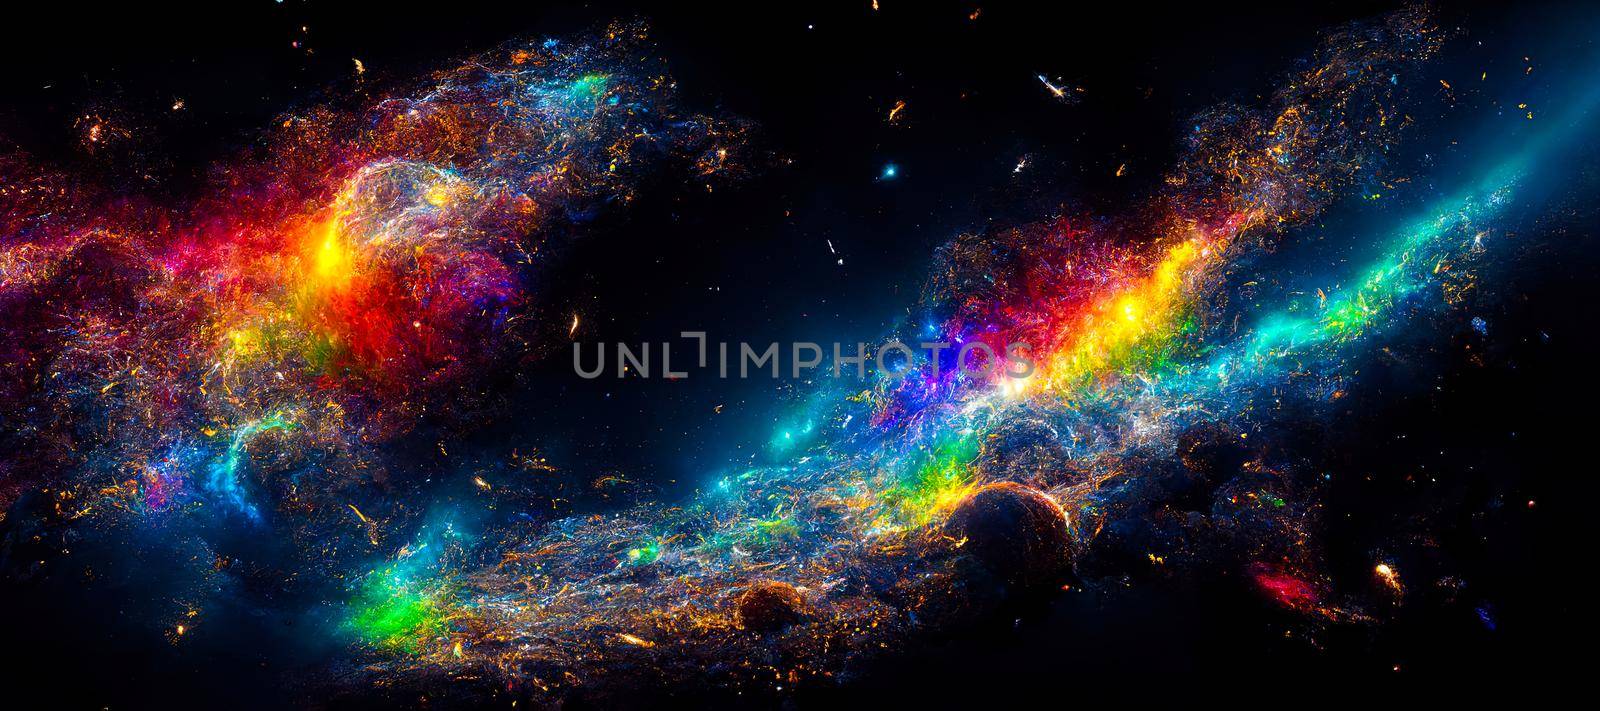 abstract background of outer space with ultra bright stars and comets on the theme of explosions and life in space by TRMK